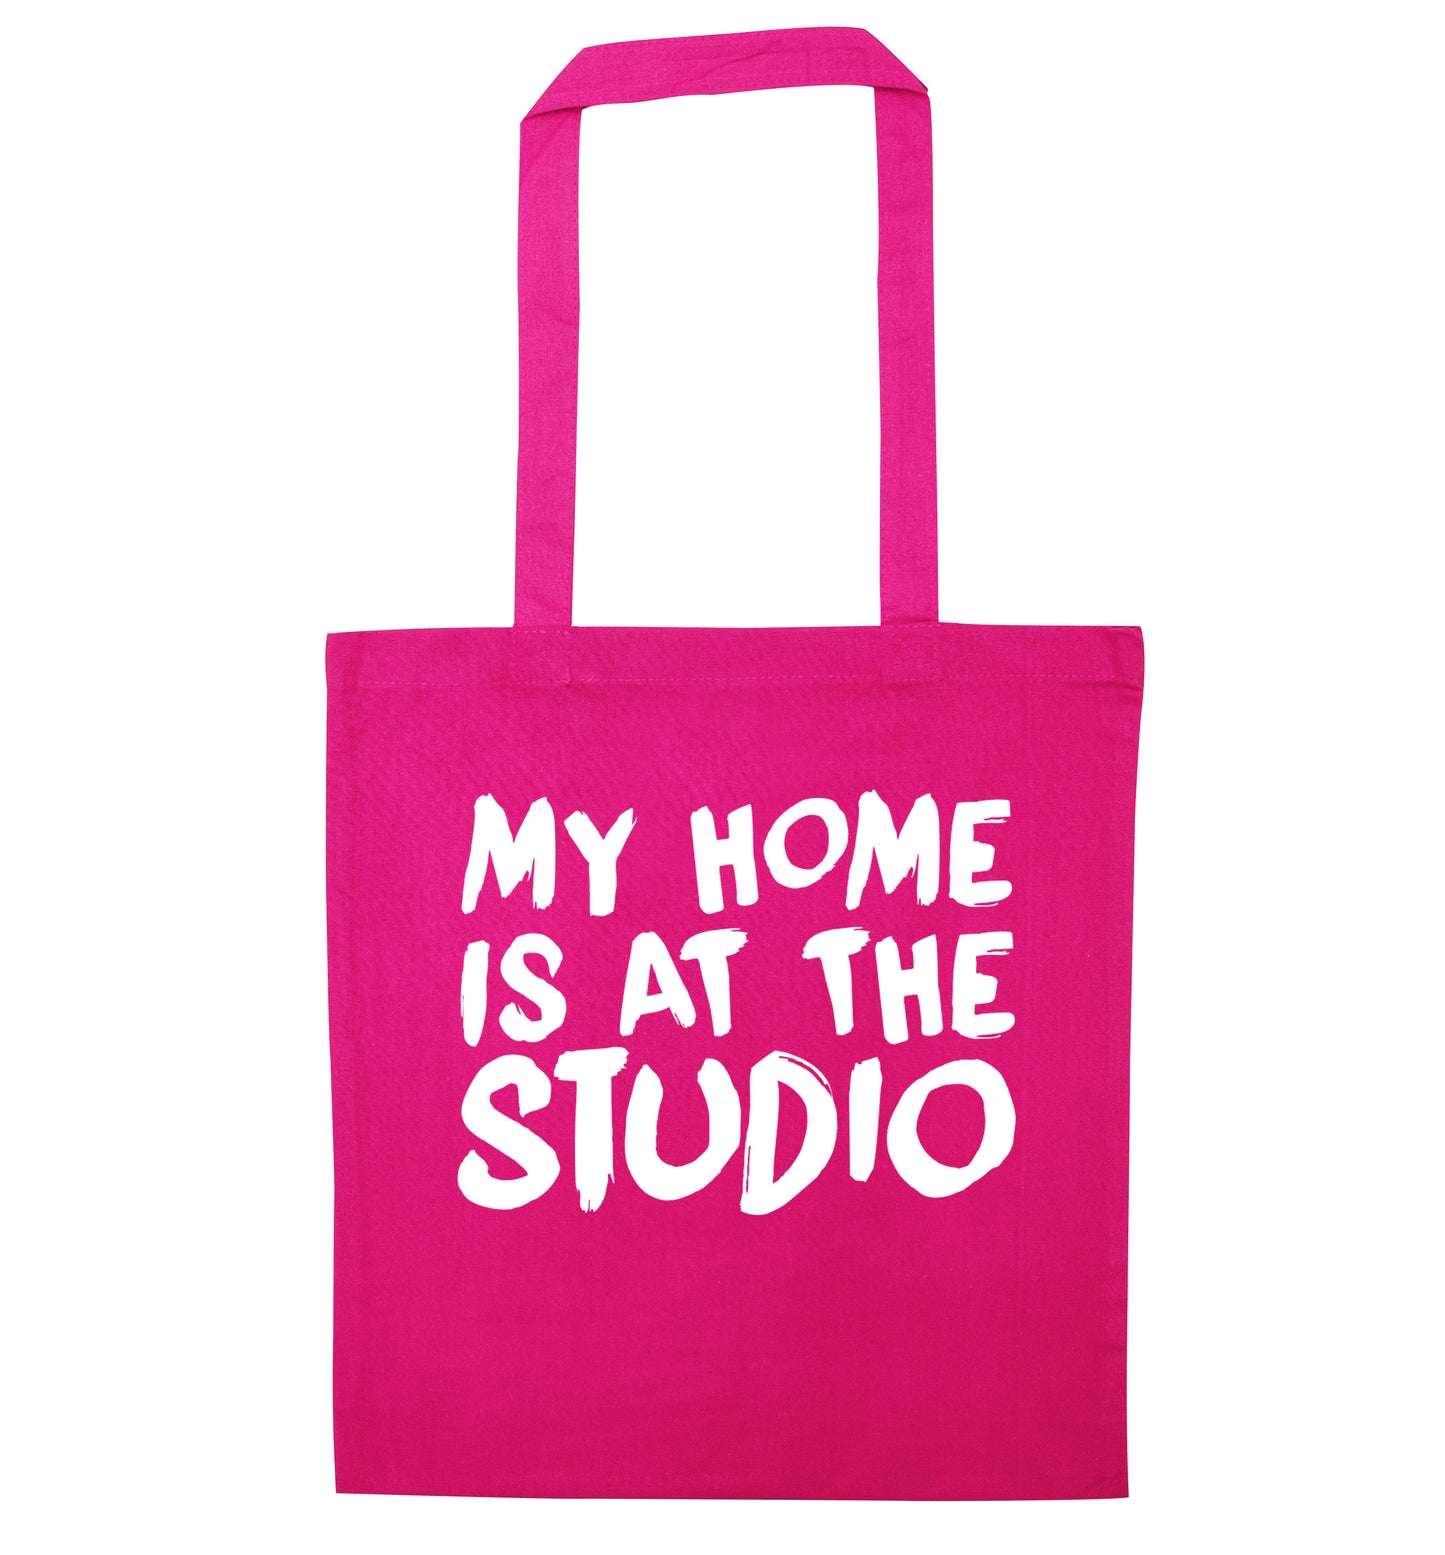 My home is at the studio pink tote bag